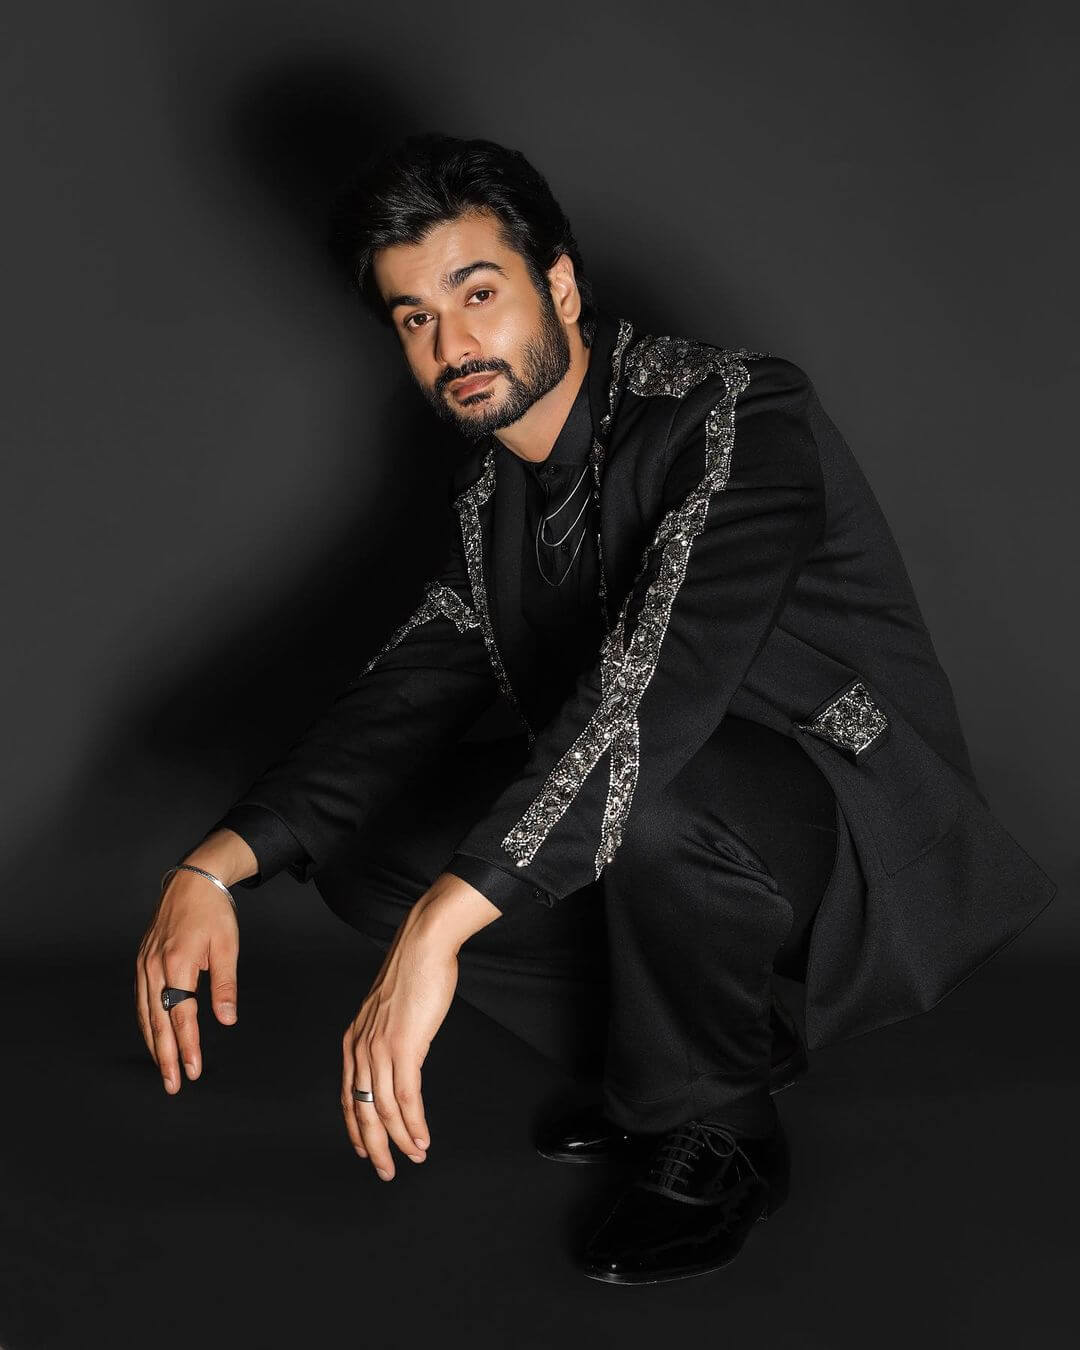 Actor Sunny Kaushal in black outfit